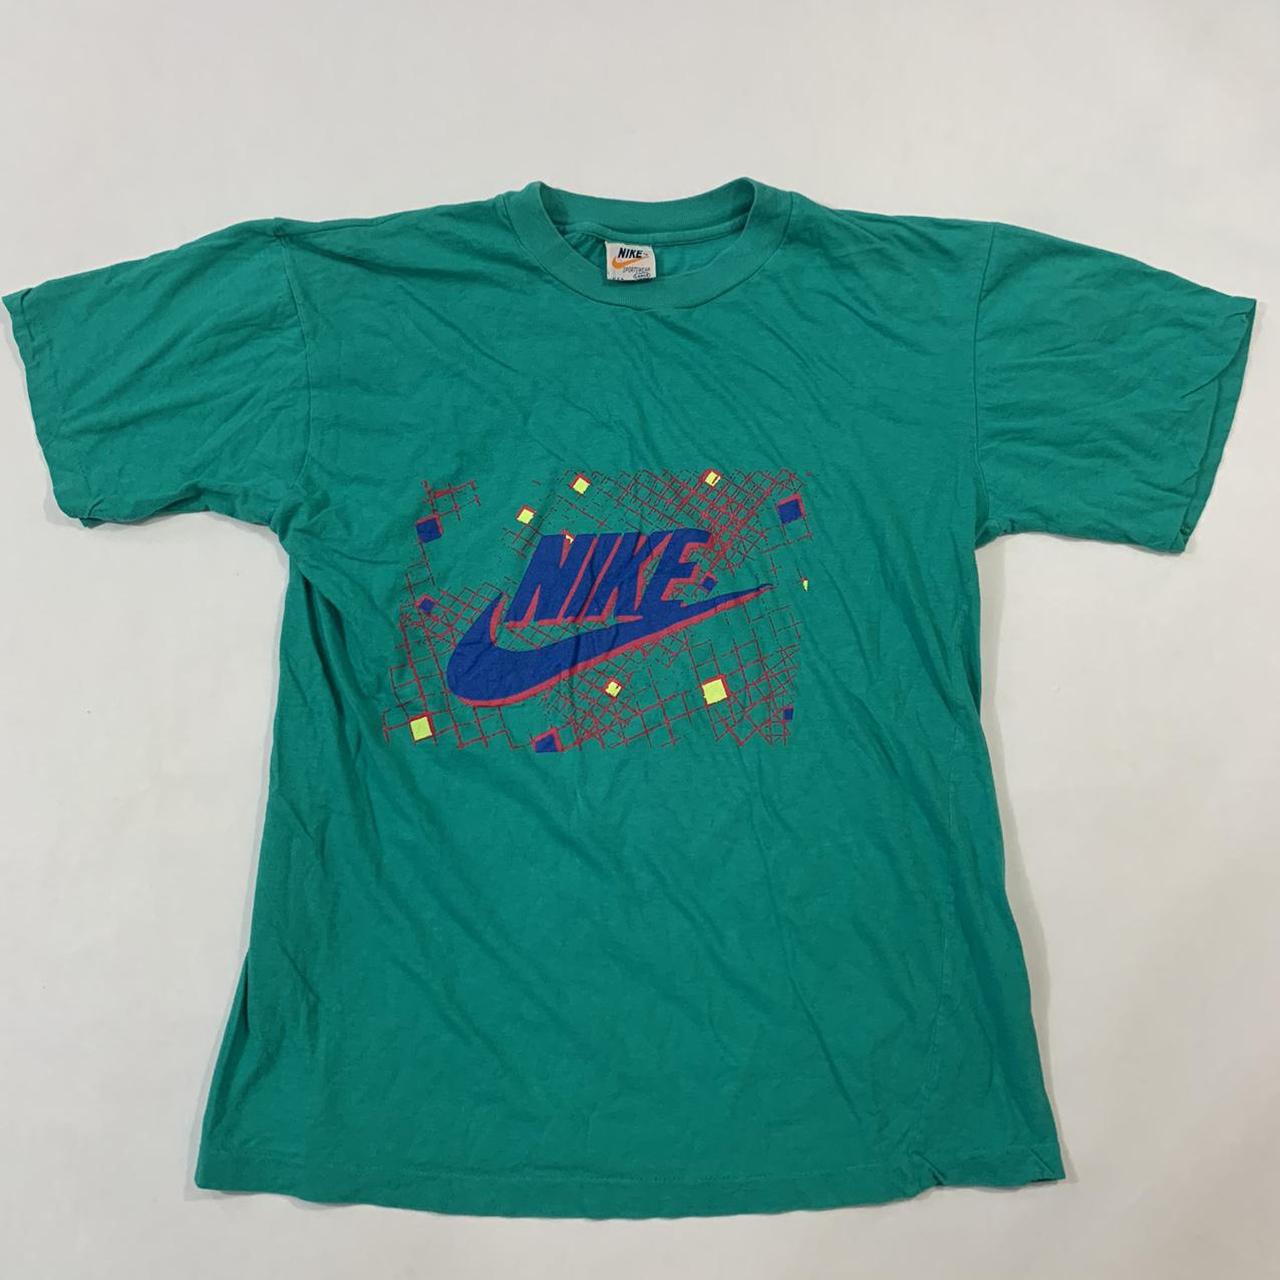 Product Image 1 - Vintage 80s Nike Sportswear Graphic